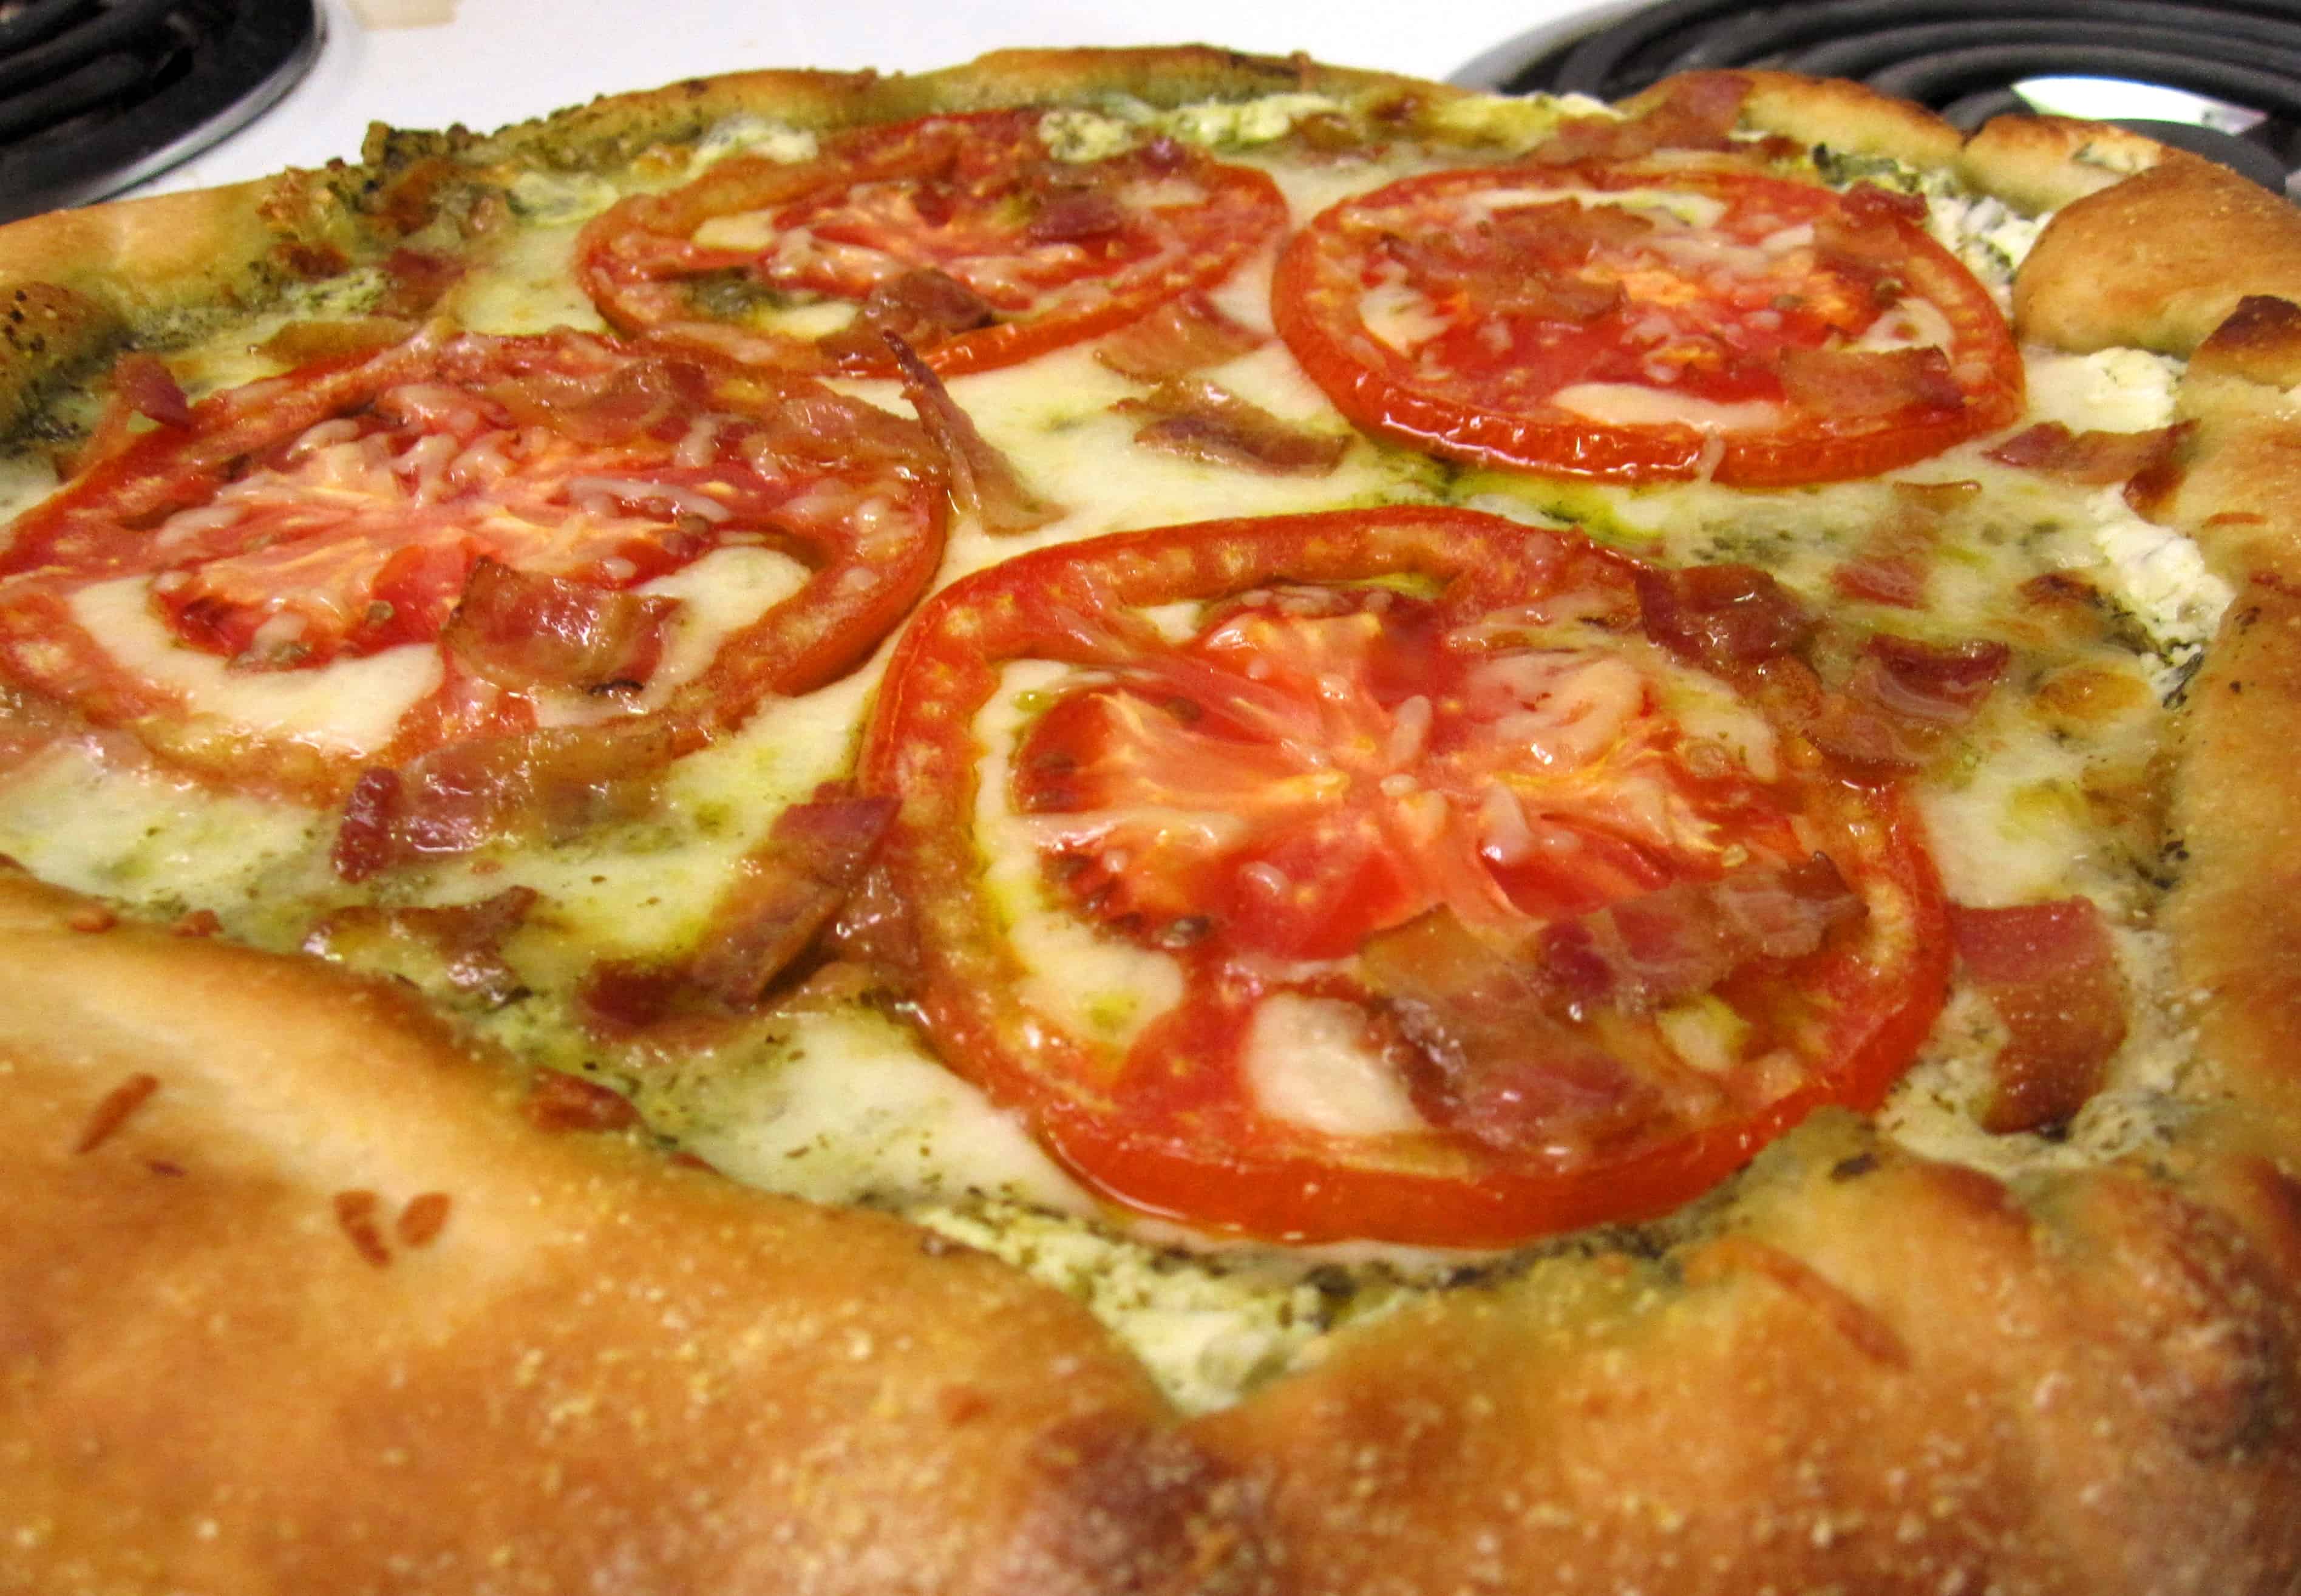 Tomato-Pesto Pizza with Basil and Goat Cheese Stuffed Crust | The ...